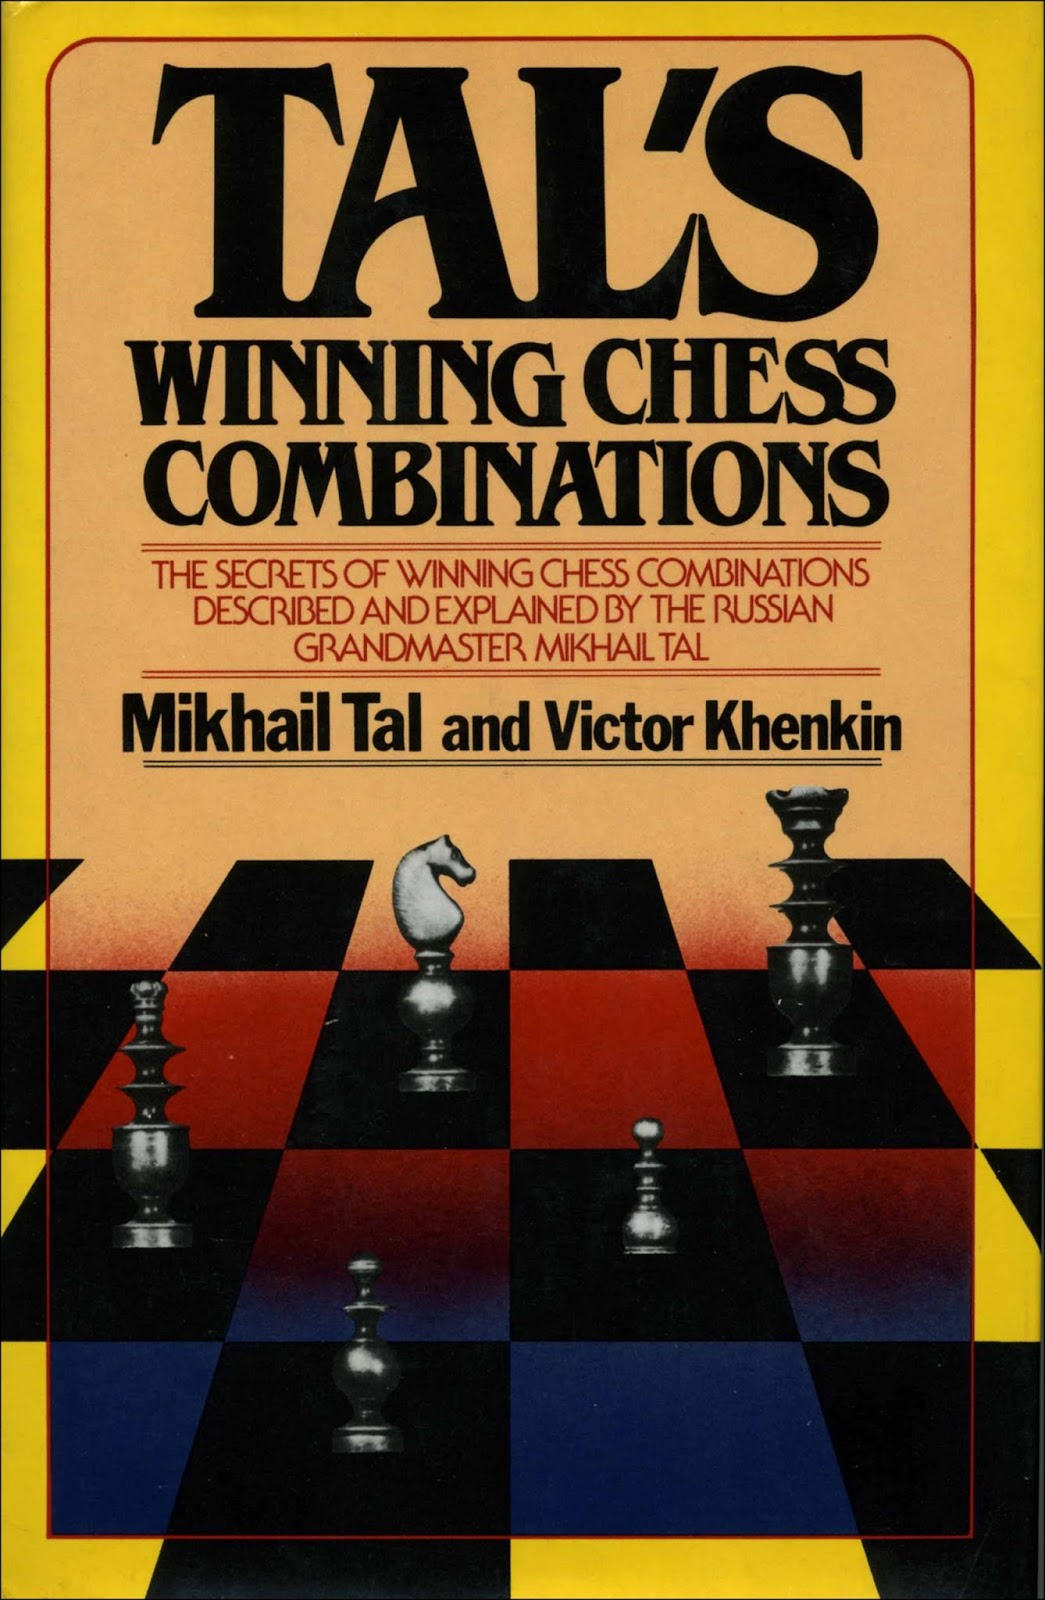 The Next Move Is. Studies in Chess Combinations by E.G.R. Cordingley:  Hardcover (1944)